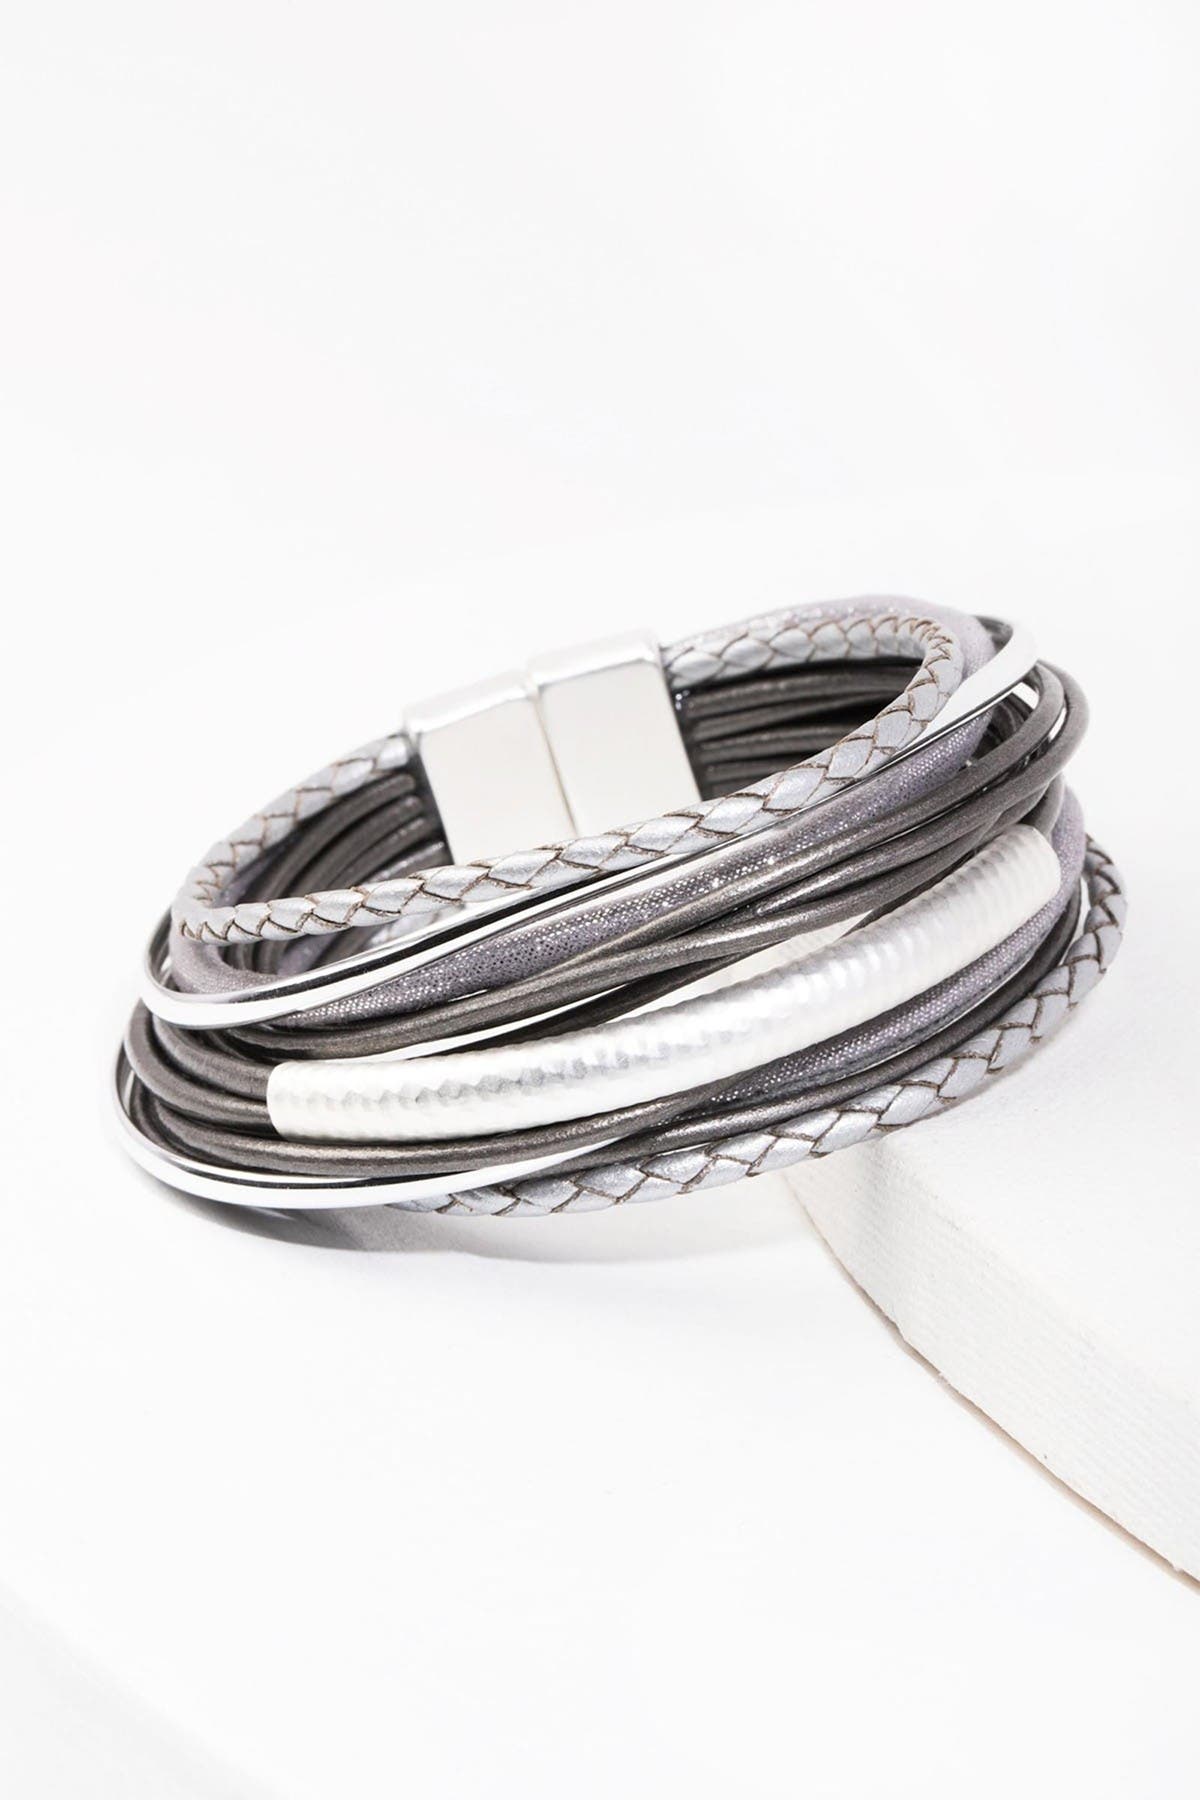 Saachi Sophisticated Hammered Tube Leather & Faux Suede Multi-strand Bracelet In Dark Grey